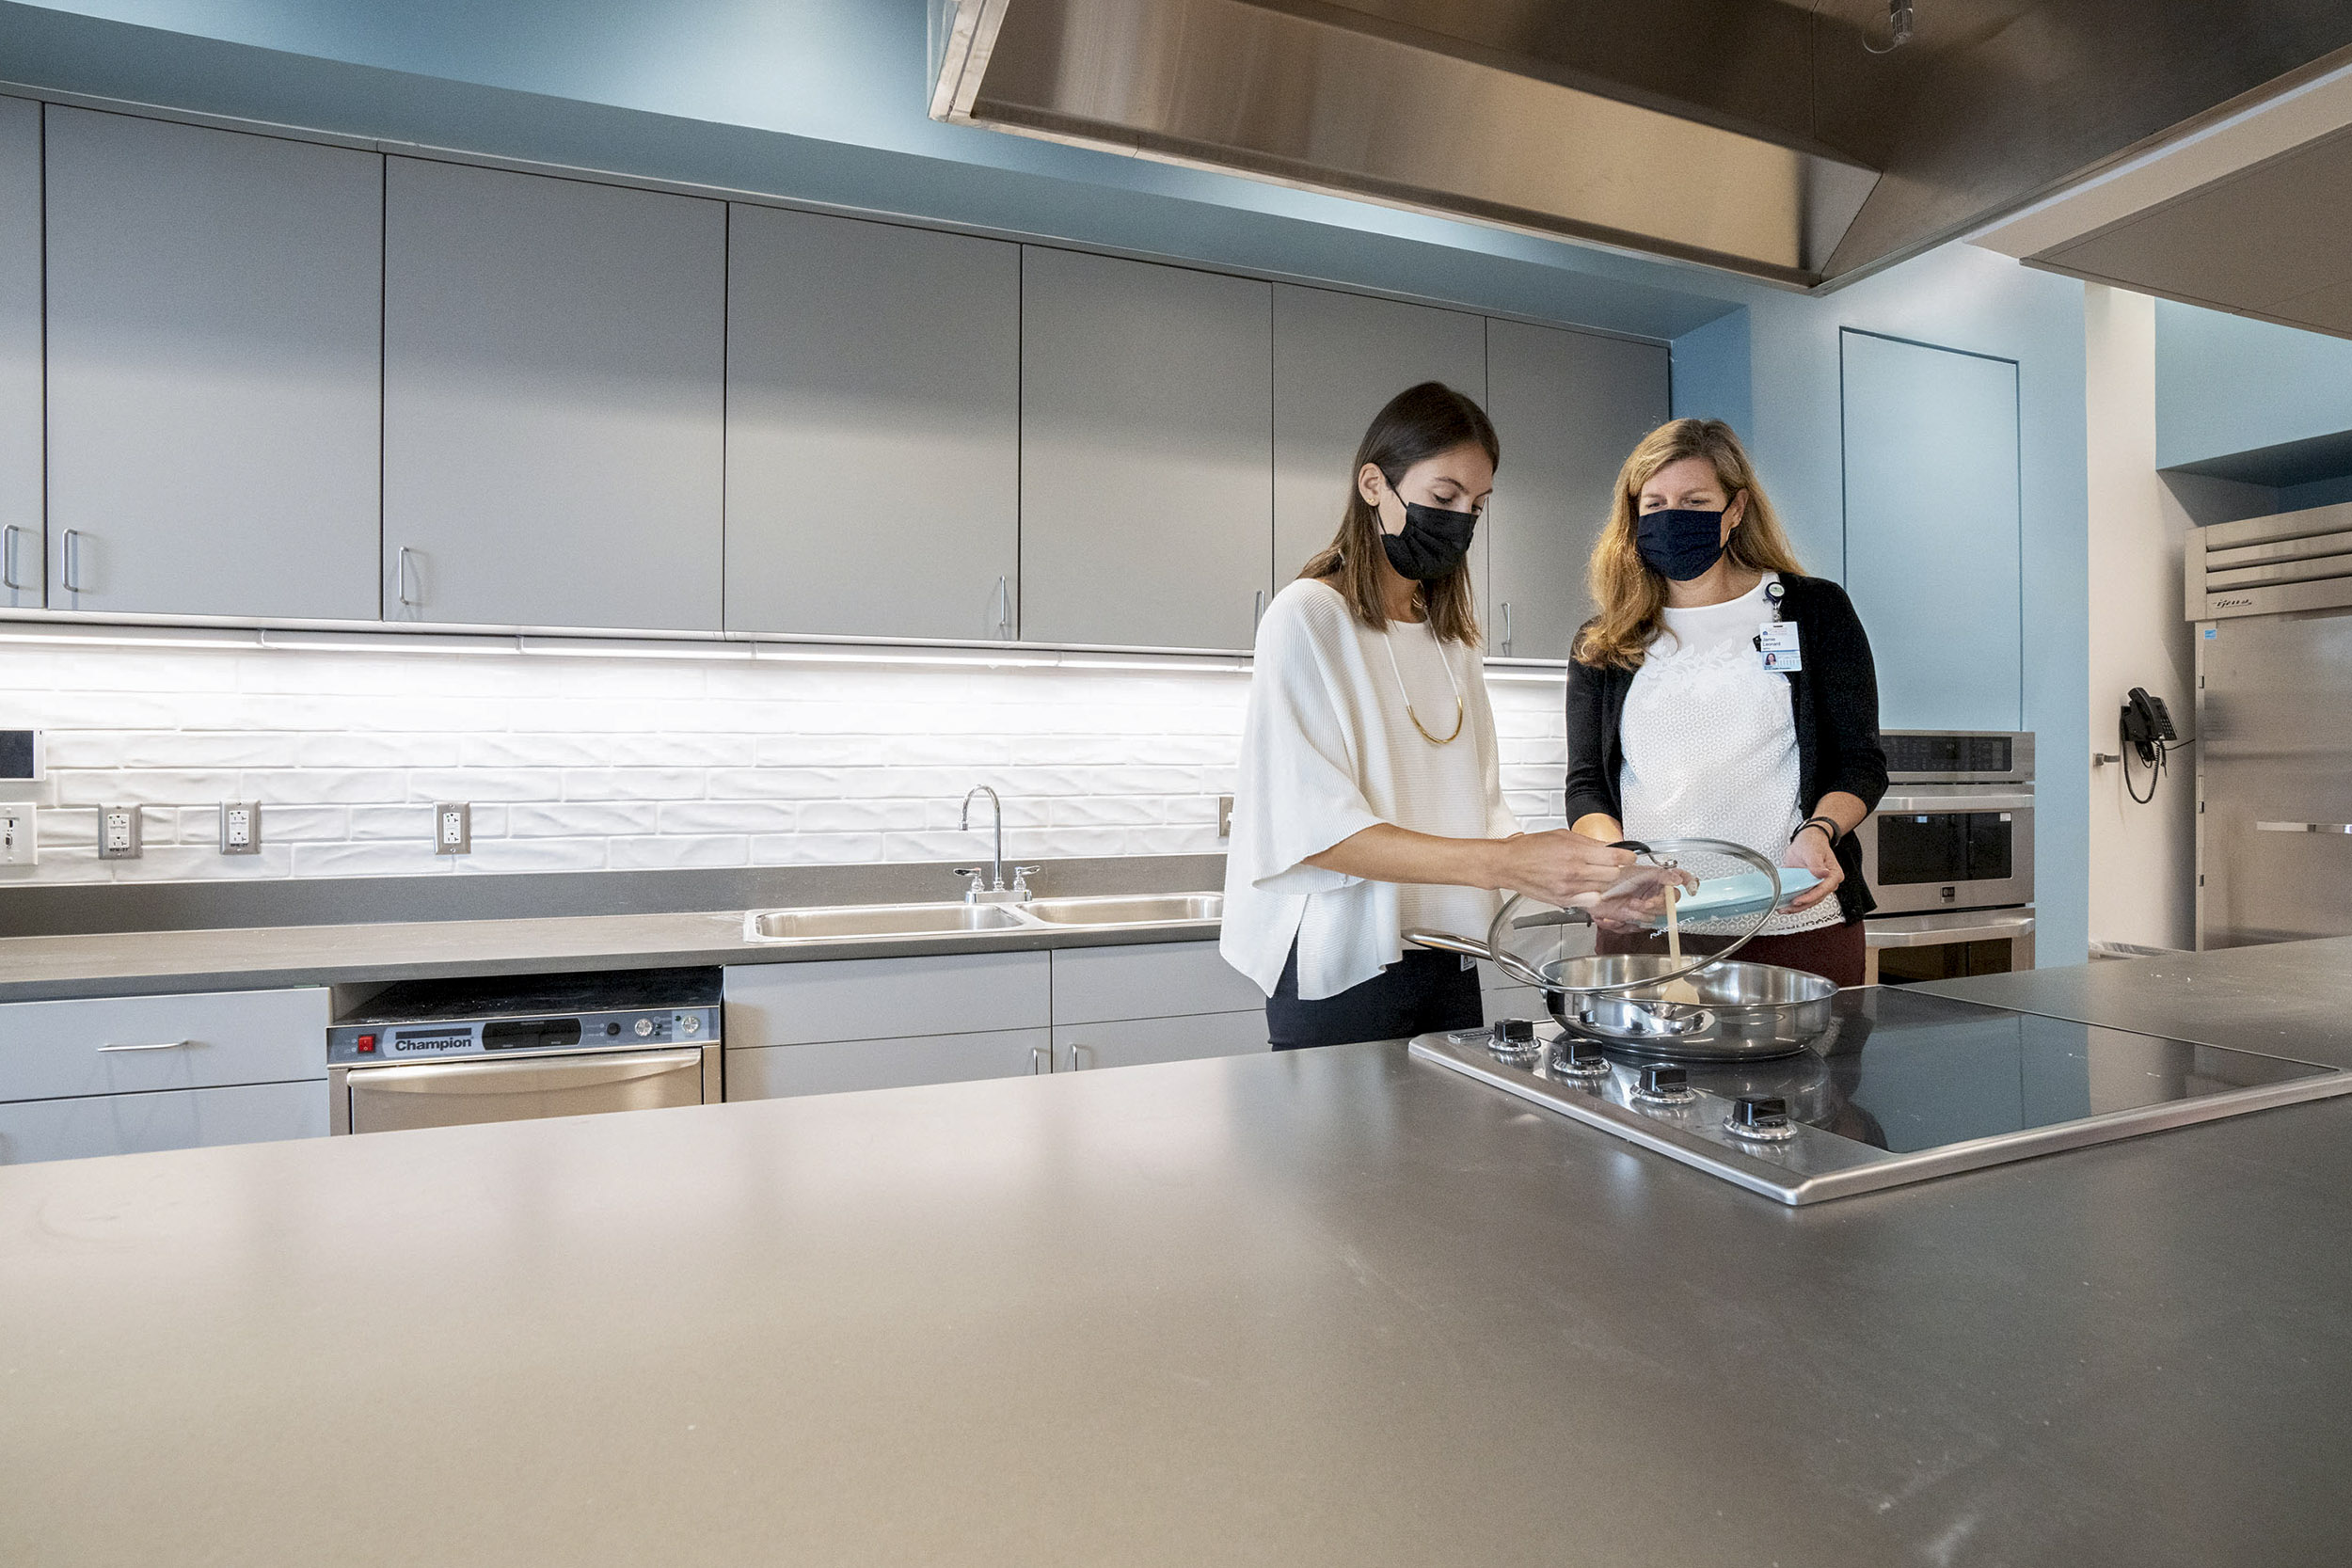 Two women in the Health and Wellness kitchen cooking a dish together on the stove